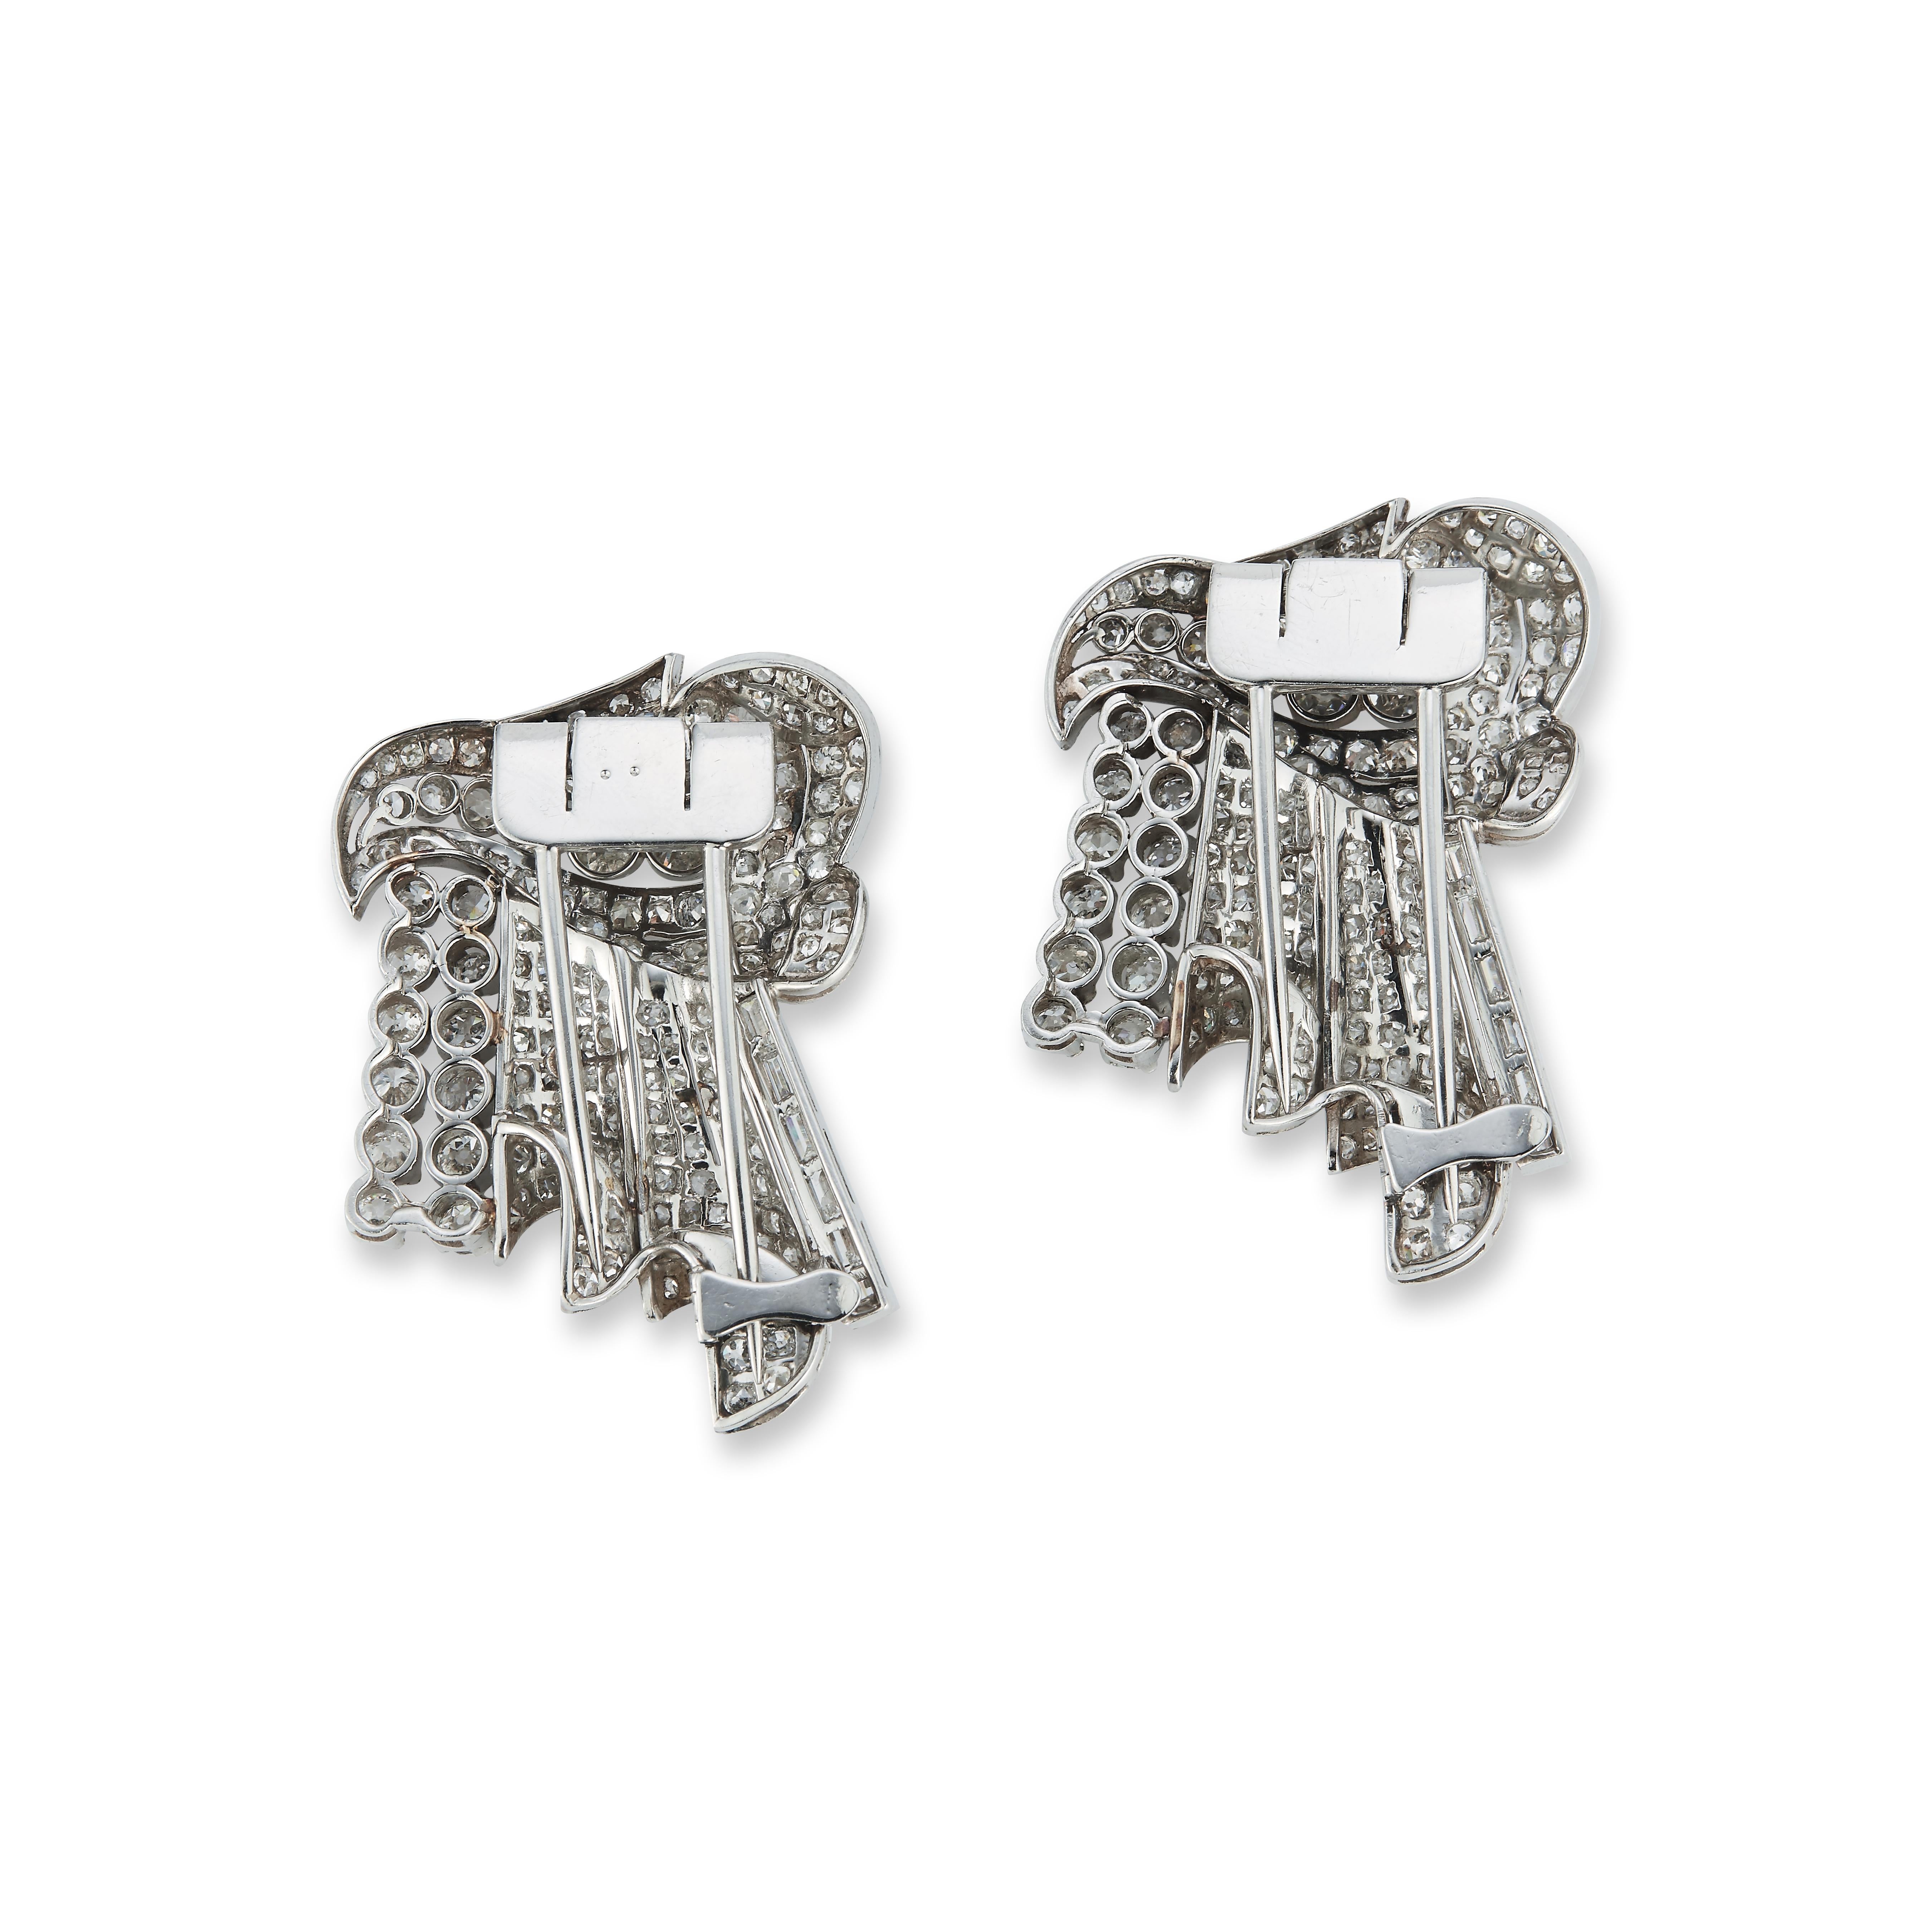 Estate Pieces Curated by Parulina- 1950s Double Clip Brooch that features approximately 15.00ct of Diamonds set in 18K White Gold.

Metal: 18K White Gold
Diamond Carat Weight: 15.00ct